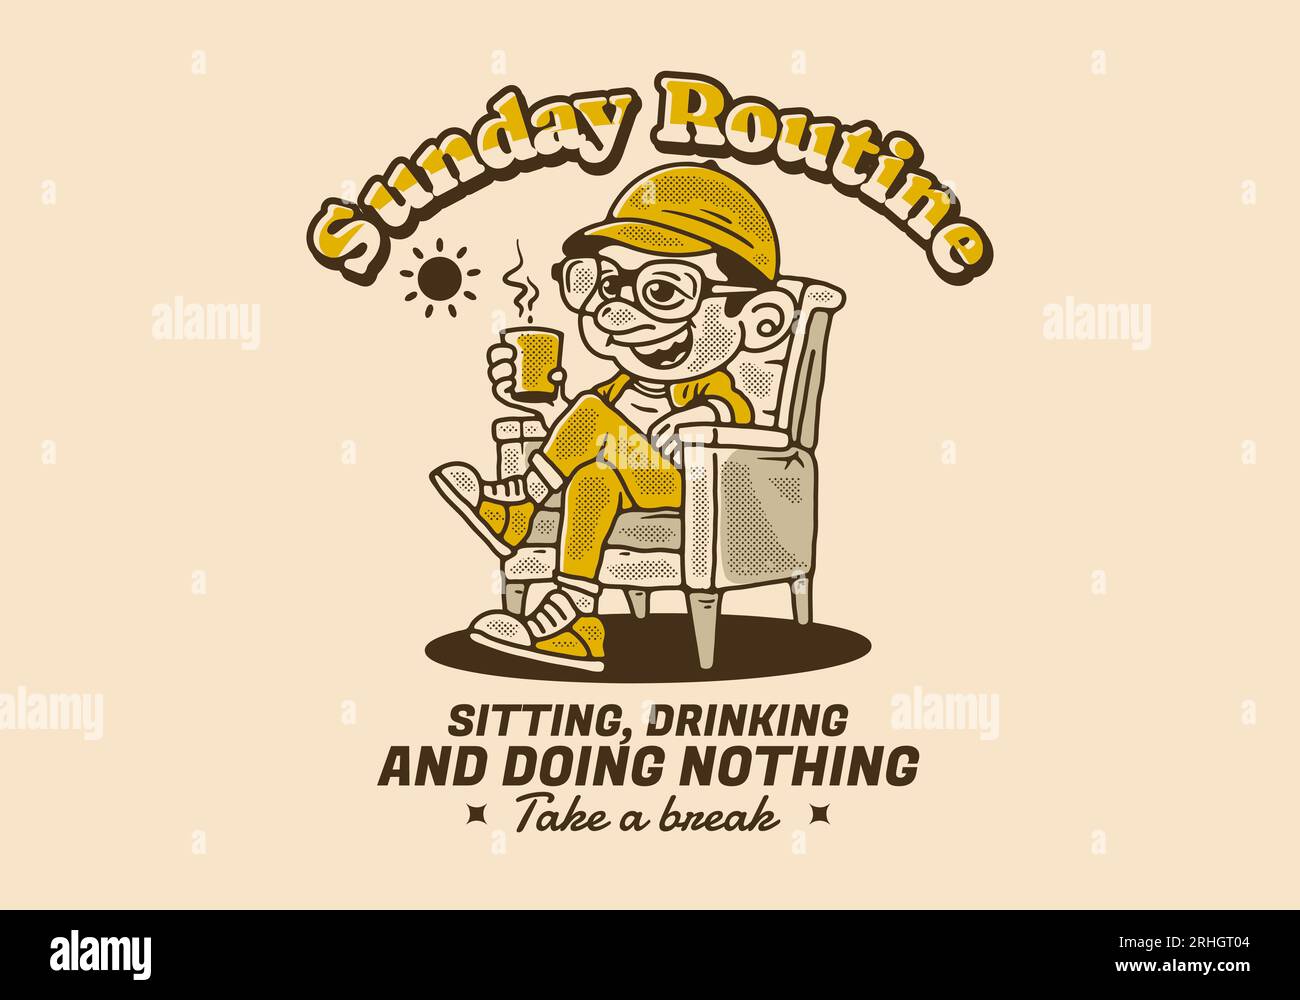 Sunday routine, sitting drinking and doing nothing, illustration of a man relaxing on a chair and holding a cup of coffee Stock Vector